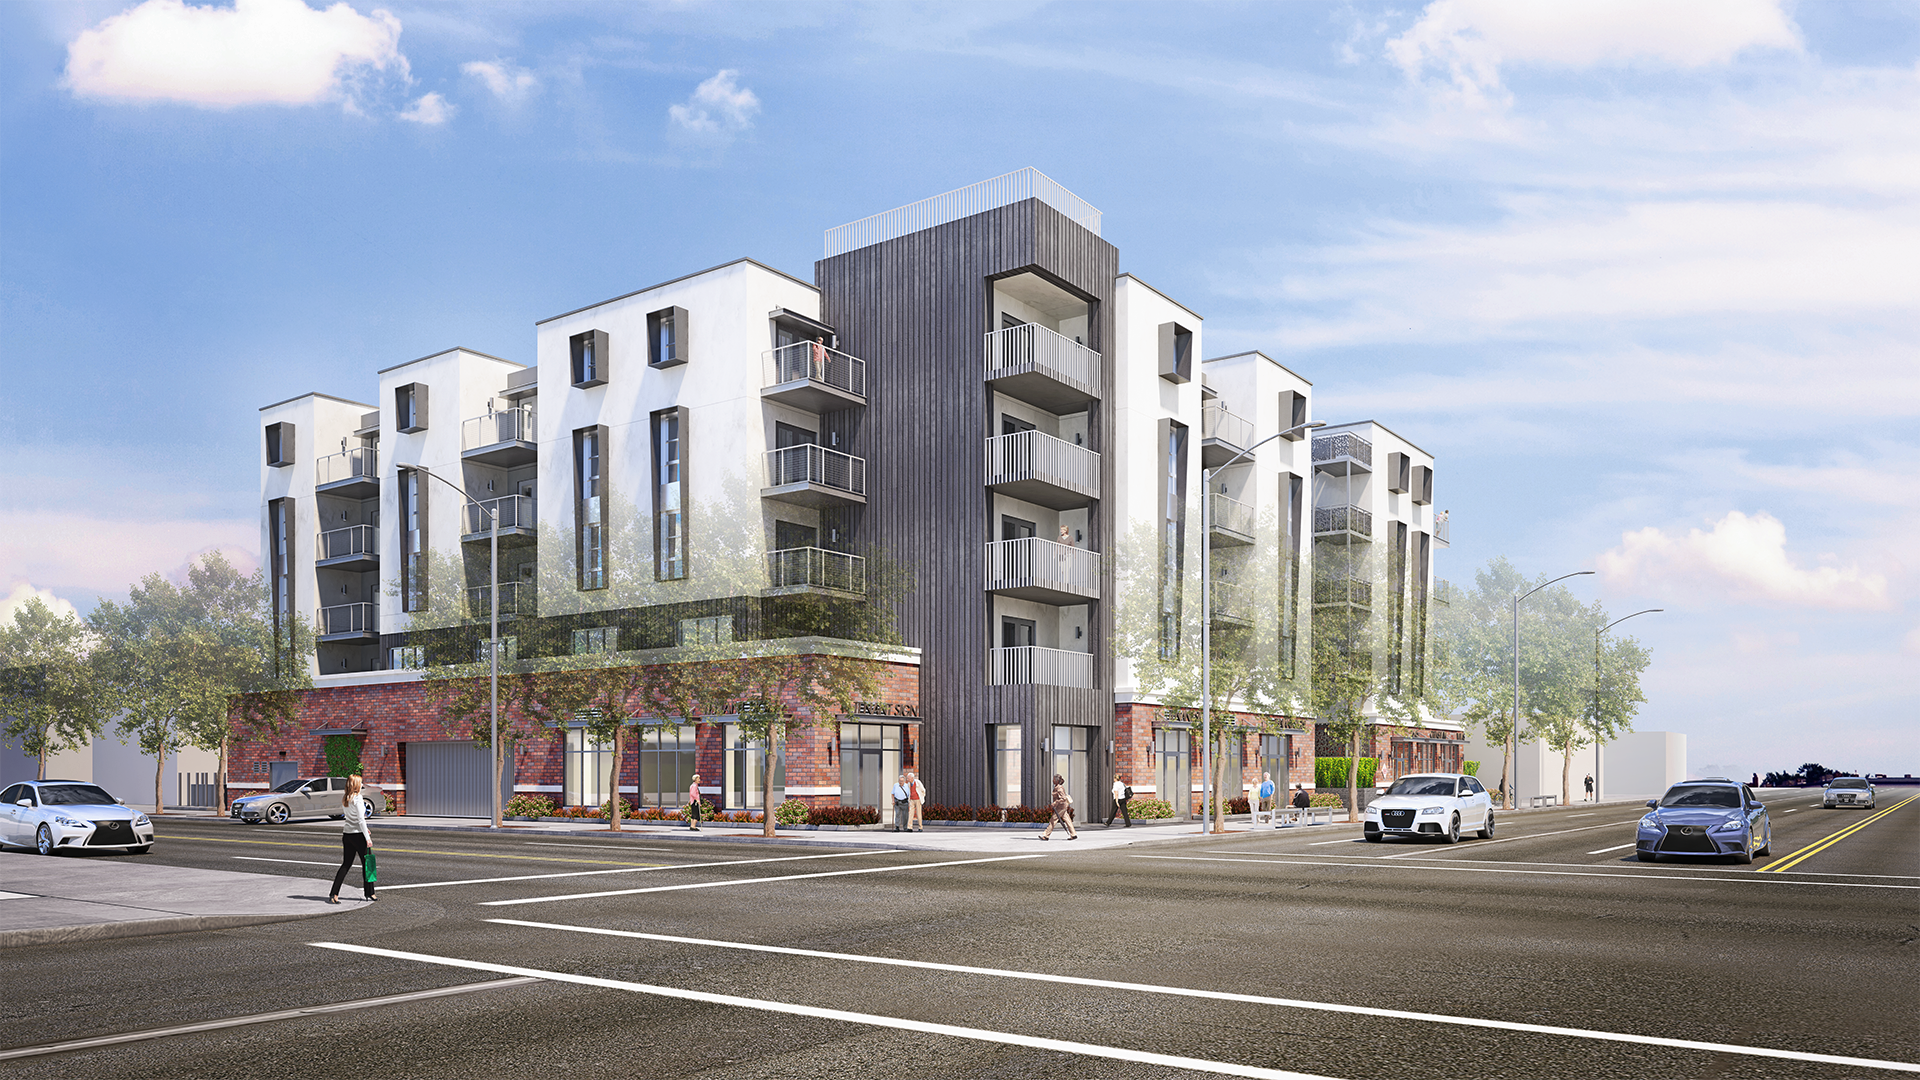 Rendering of five-story apartment building